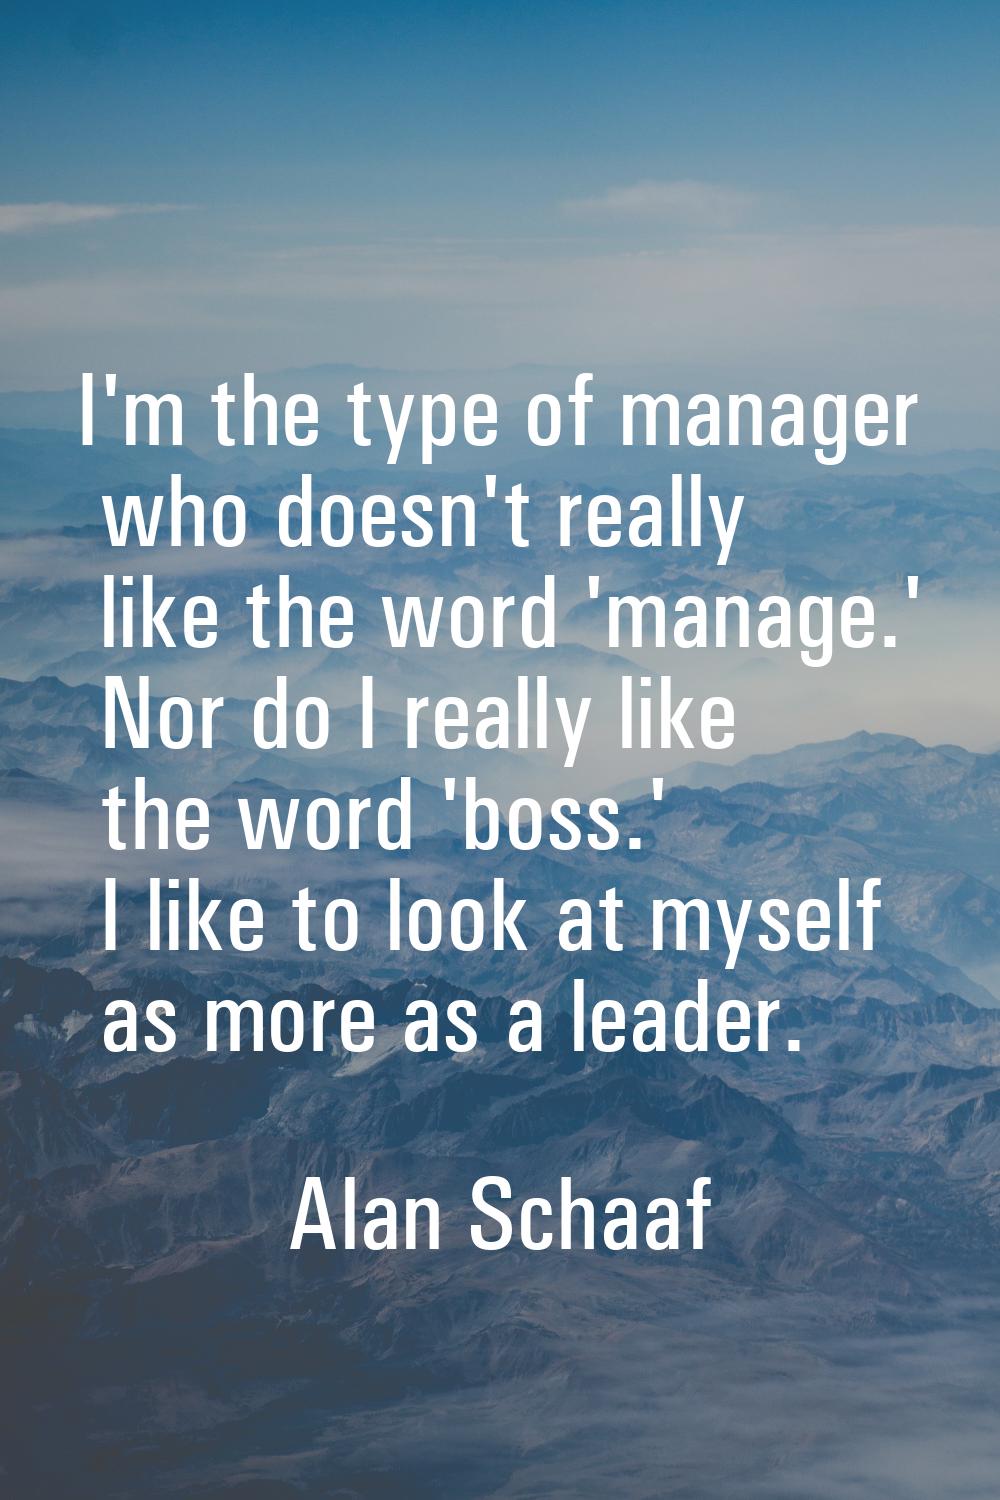 I'm the type of manager who doesn't really like the word 'manage.' Nor do I really like the word 'b